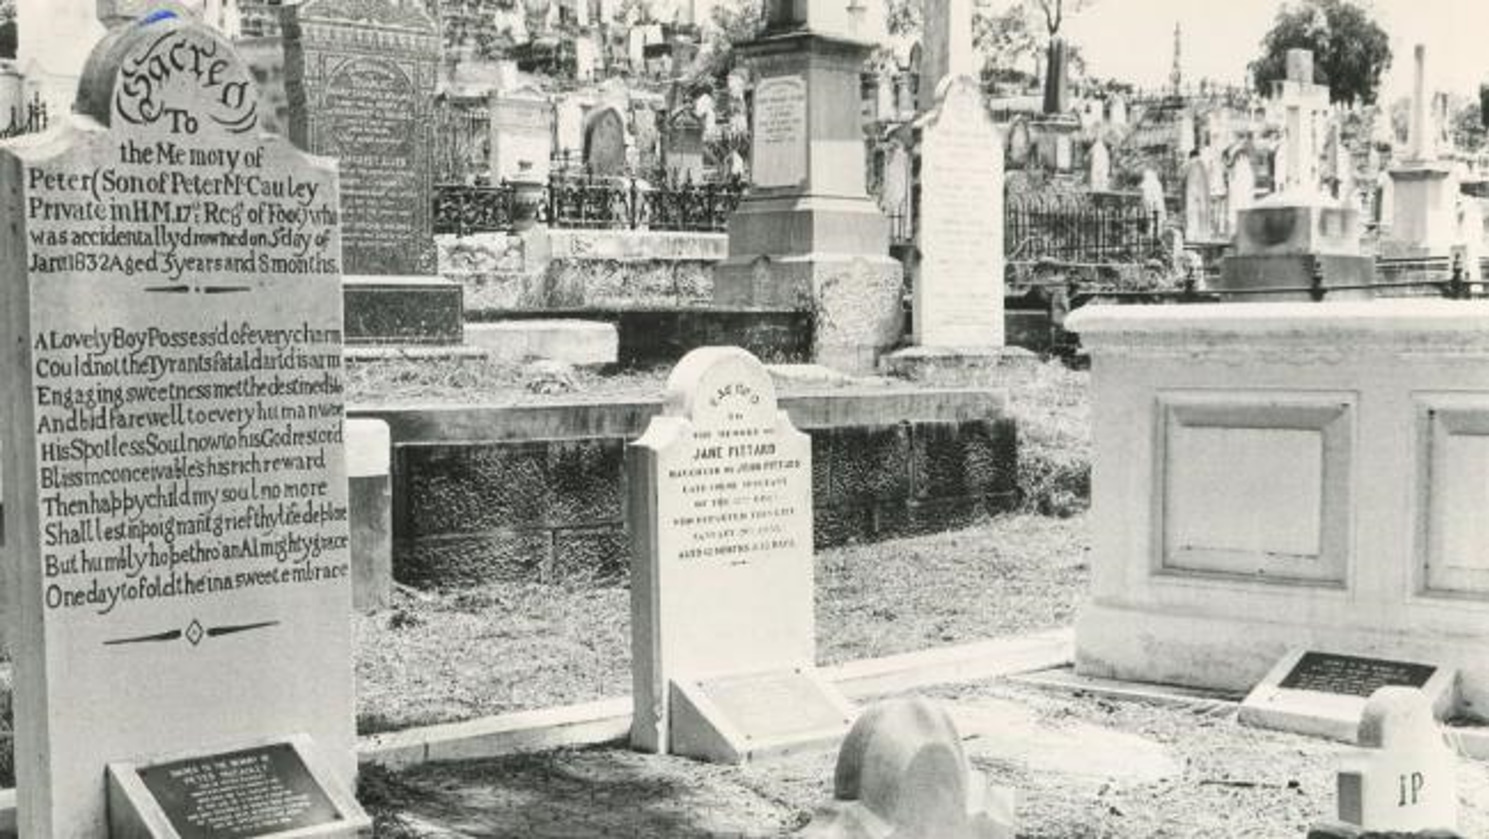 Pioneer Children's Graves at Toowong Cemetery